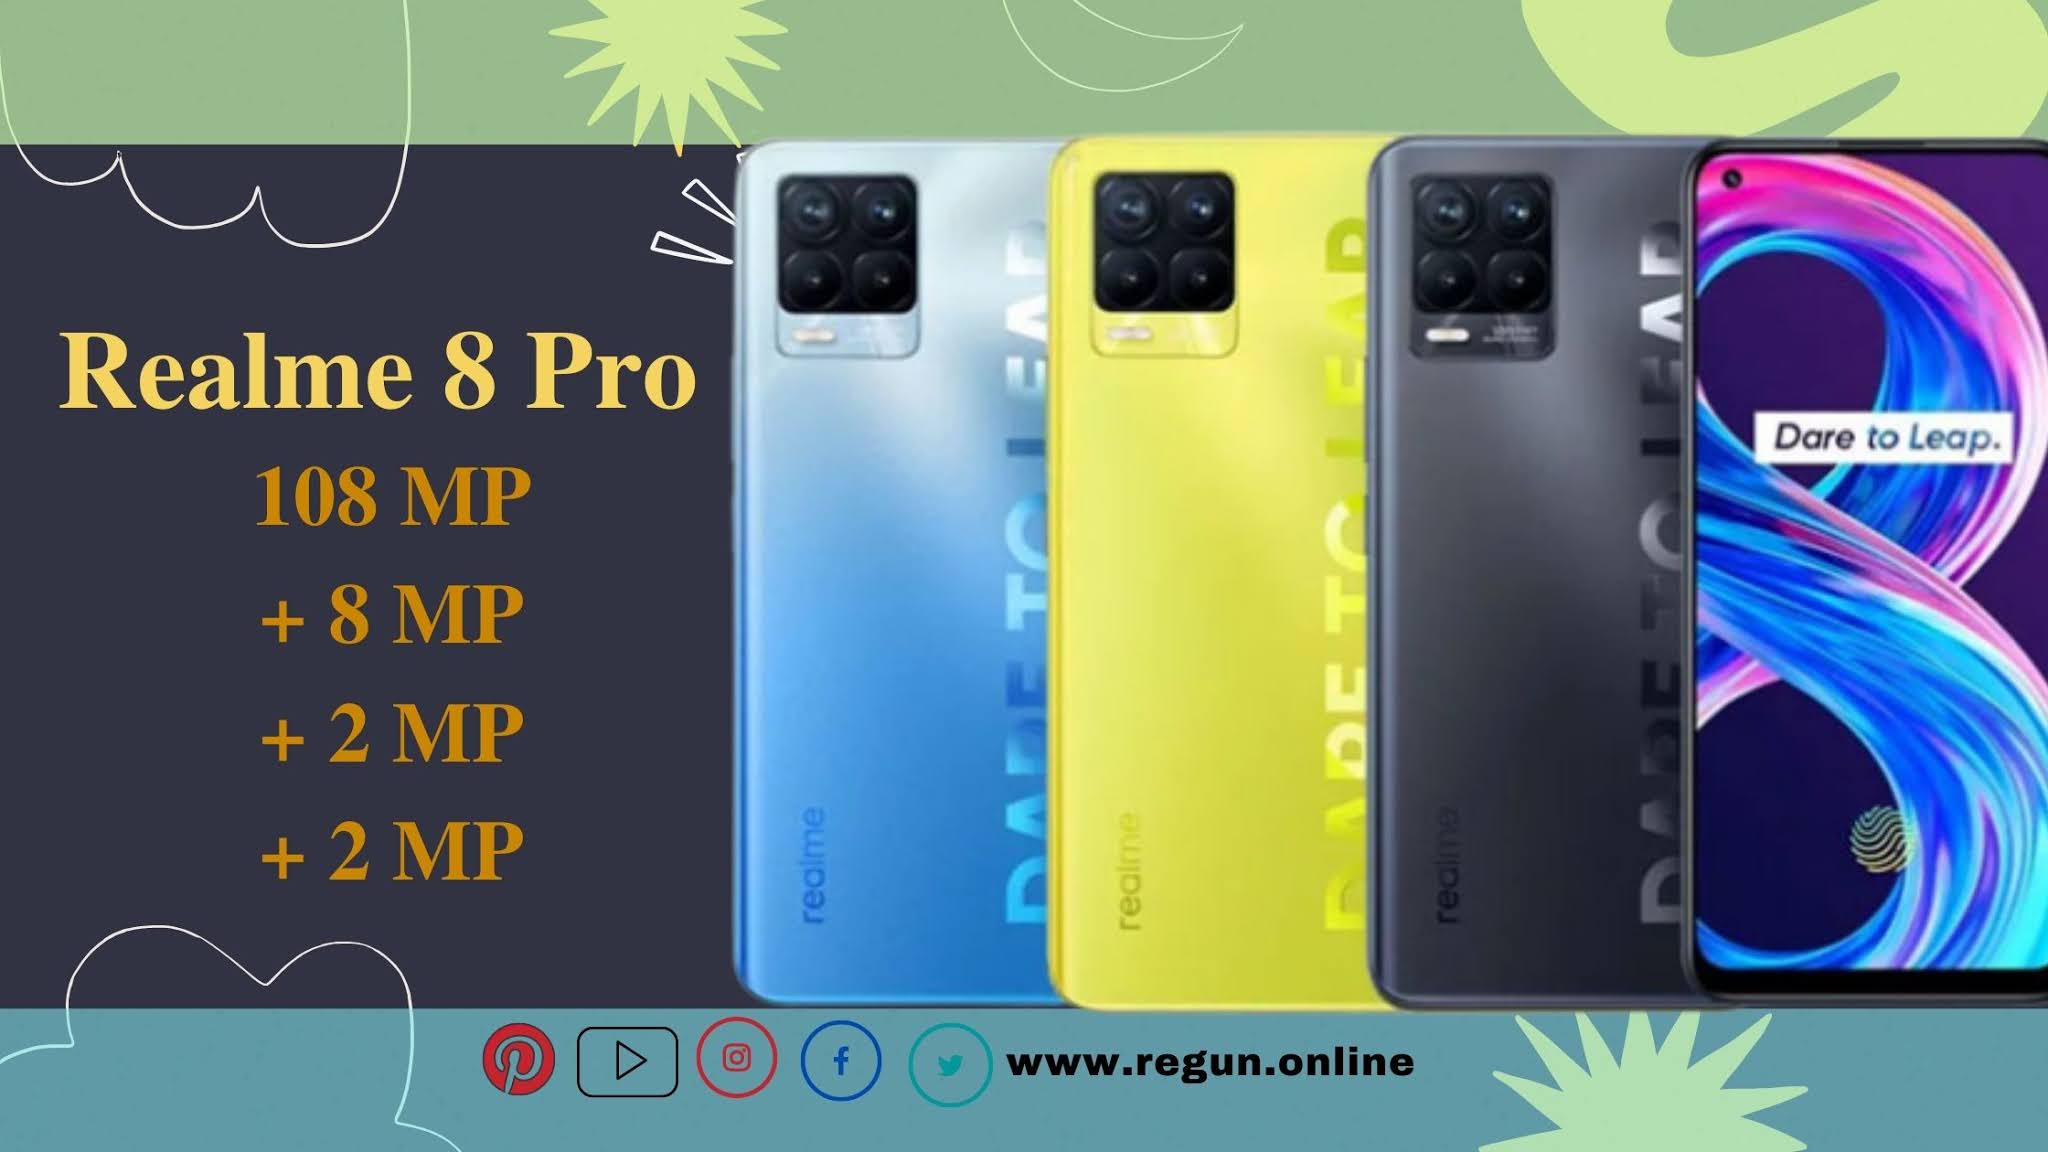 Realme 8 Pro - Full phone specifications